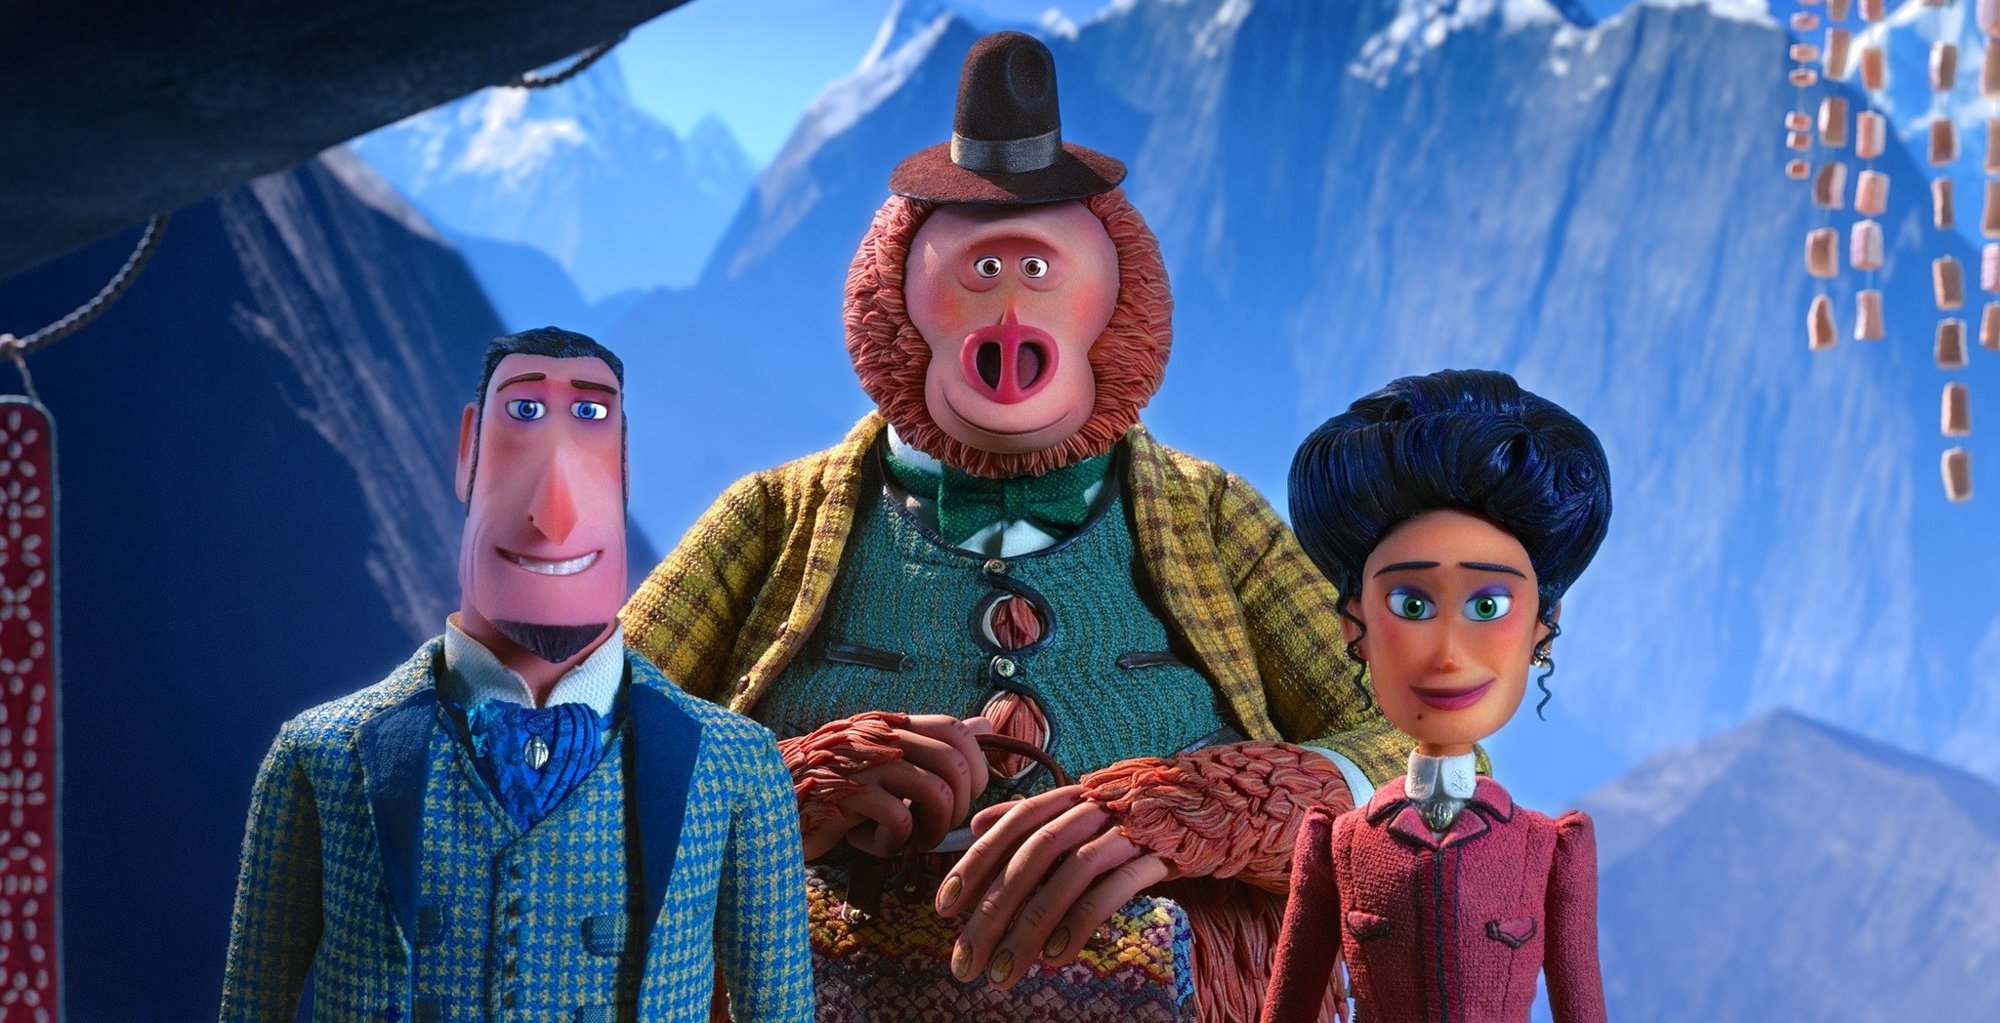 Sir Lionel Frost, Mr. Link and Adelina Fortnight from Annapurna Pictures' Missing Link (2019)